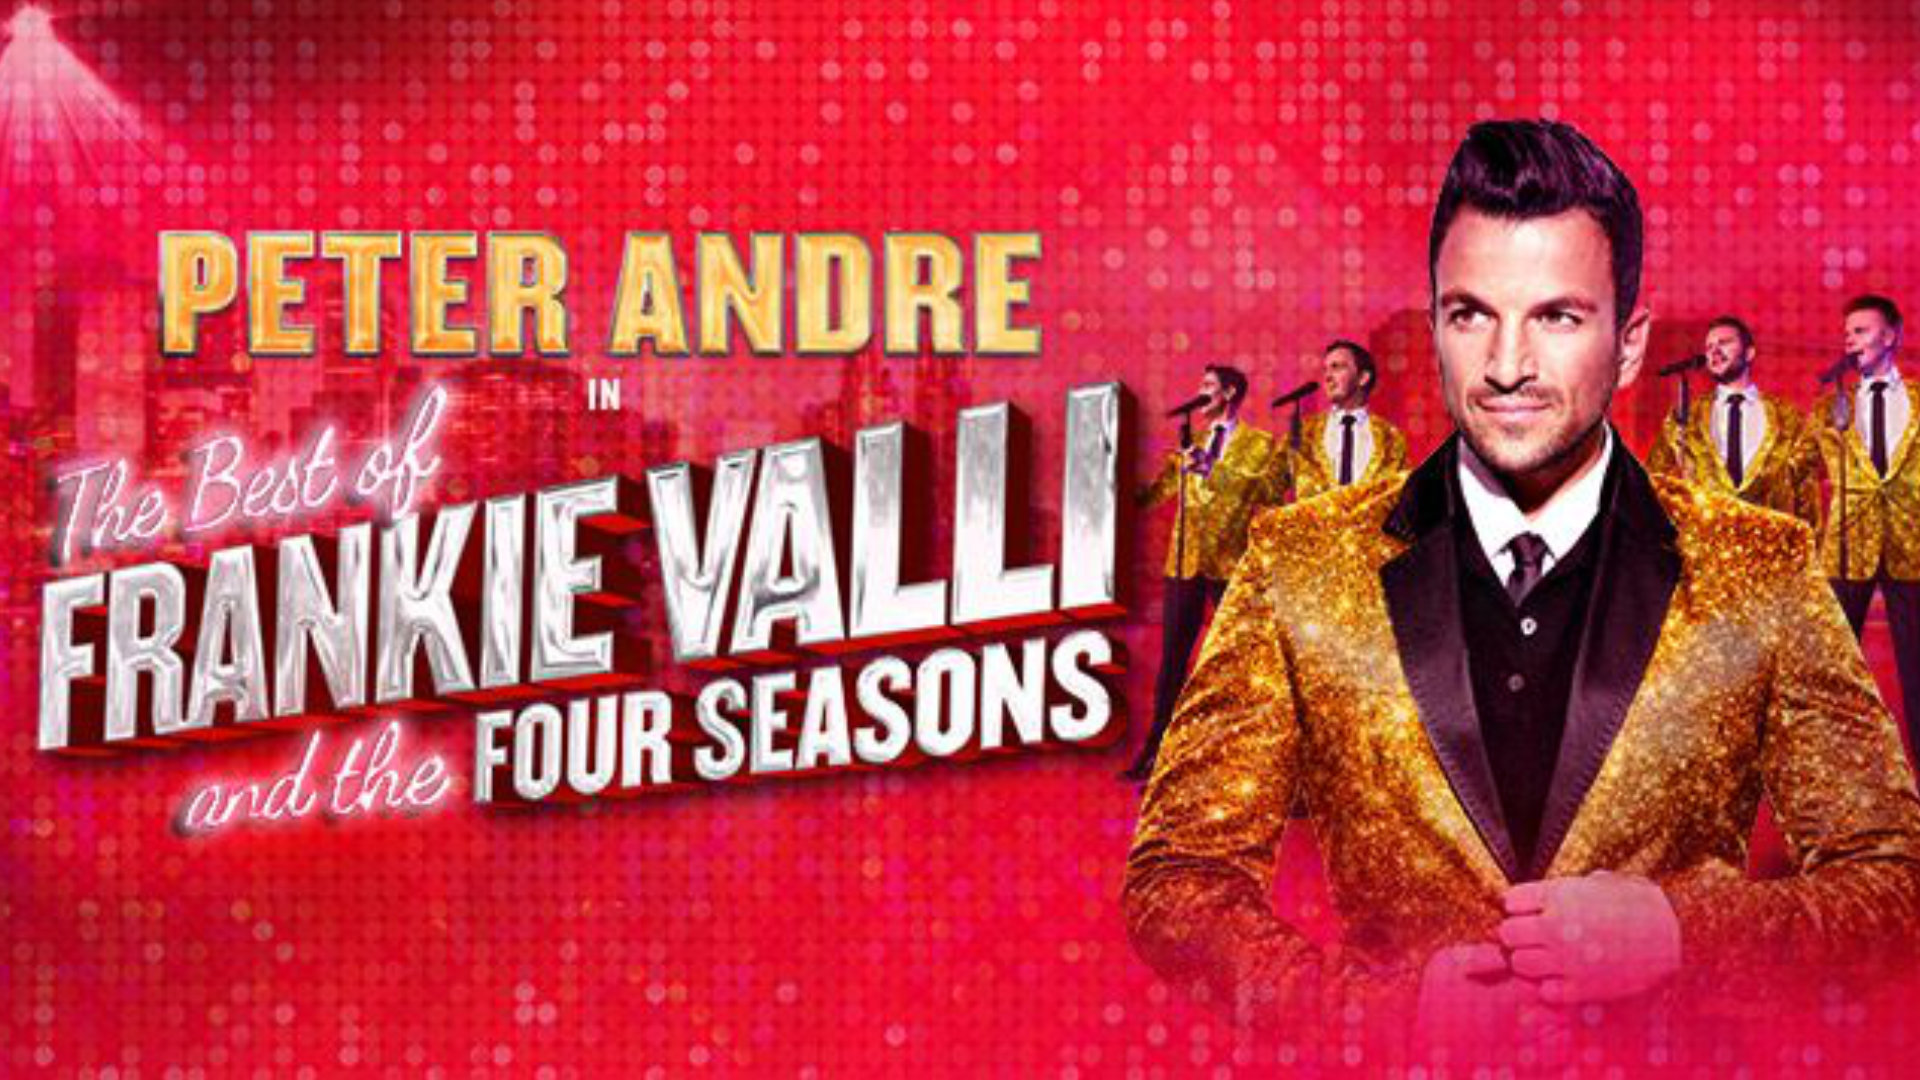 Peter Andre - The Best of Frankie Valli and the Four Seasons poster